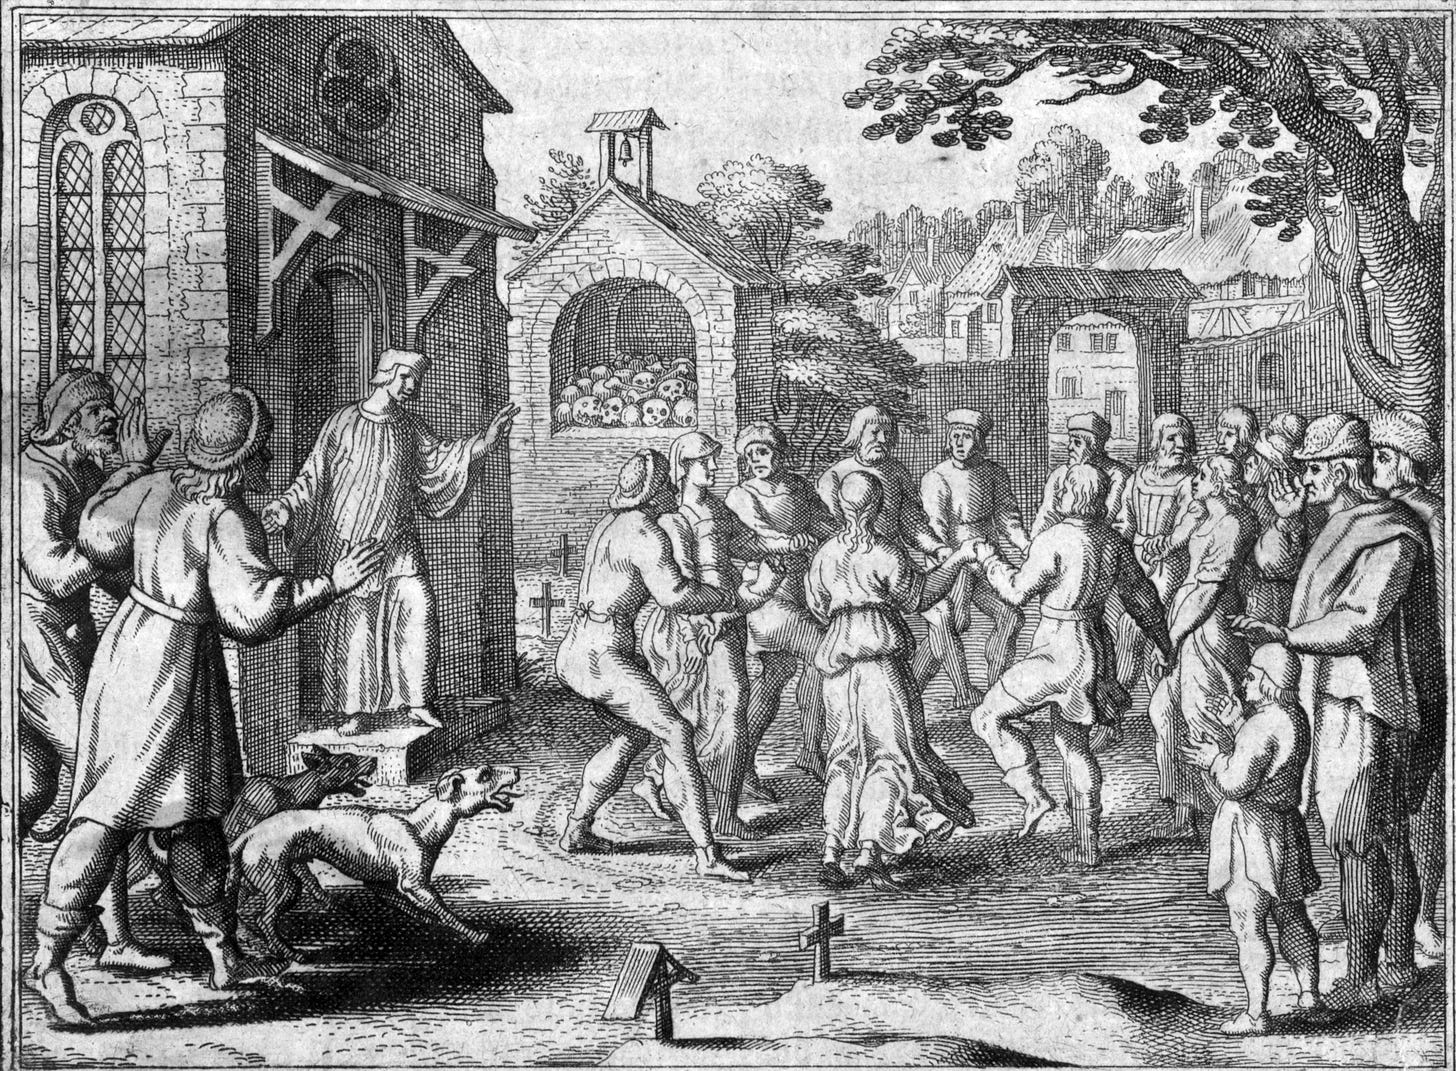 The Dancing Plague of 1518: History's Oddest Epidemic